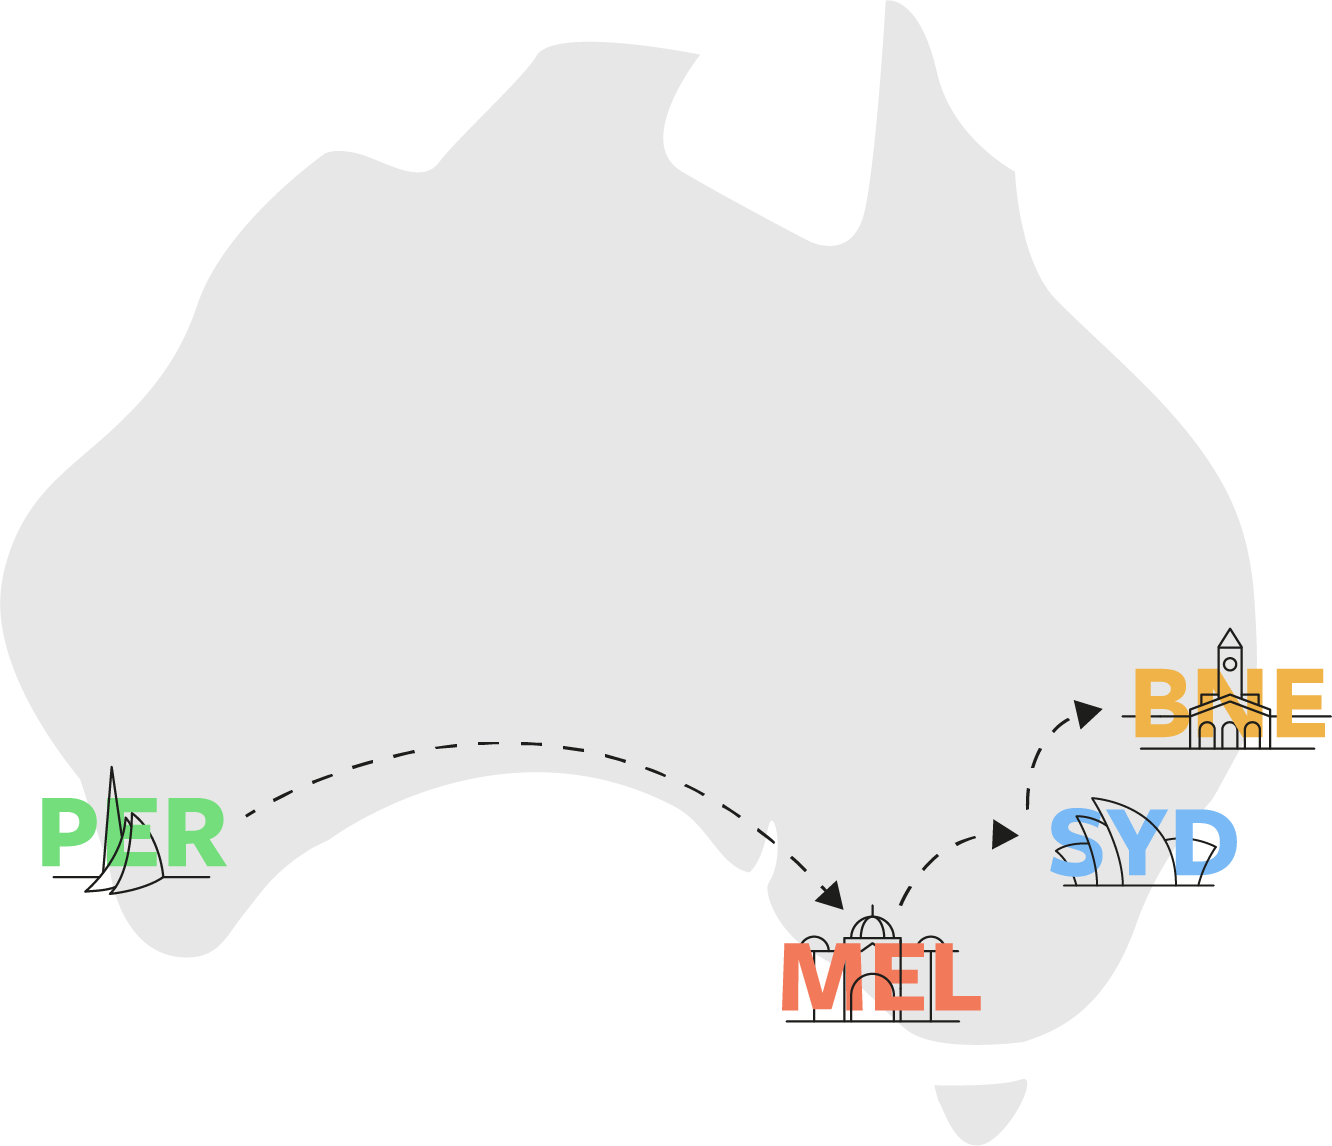 Localhost Deployment goes to Perth, Melbourne, Sydney, and Brisbane